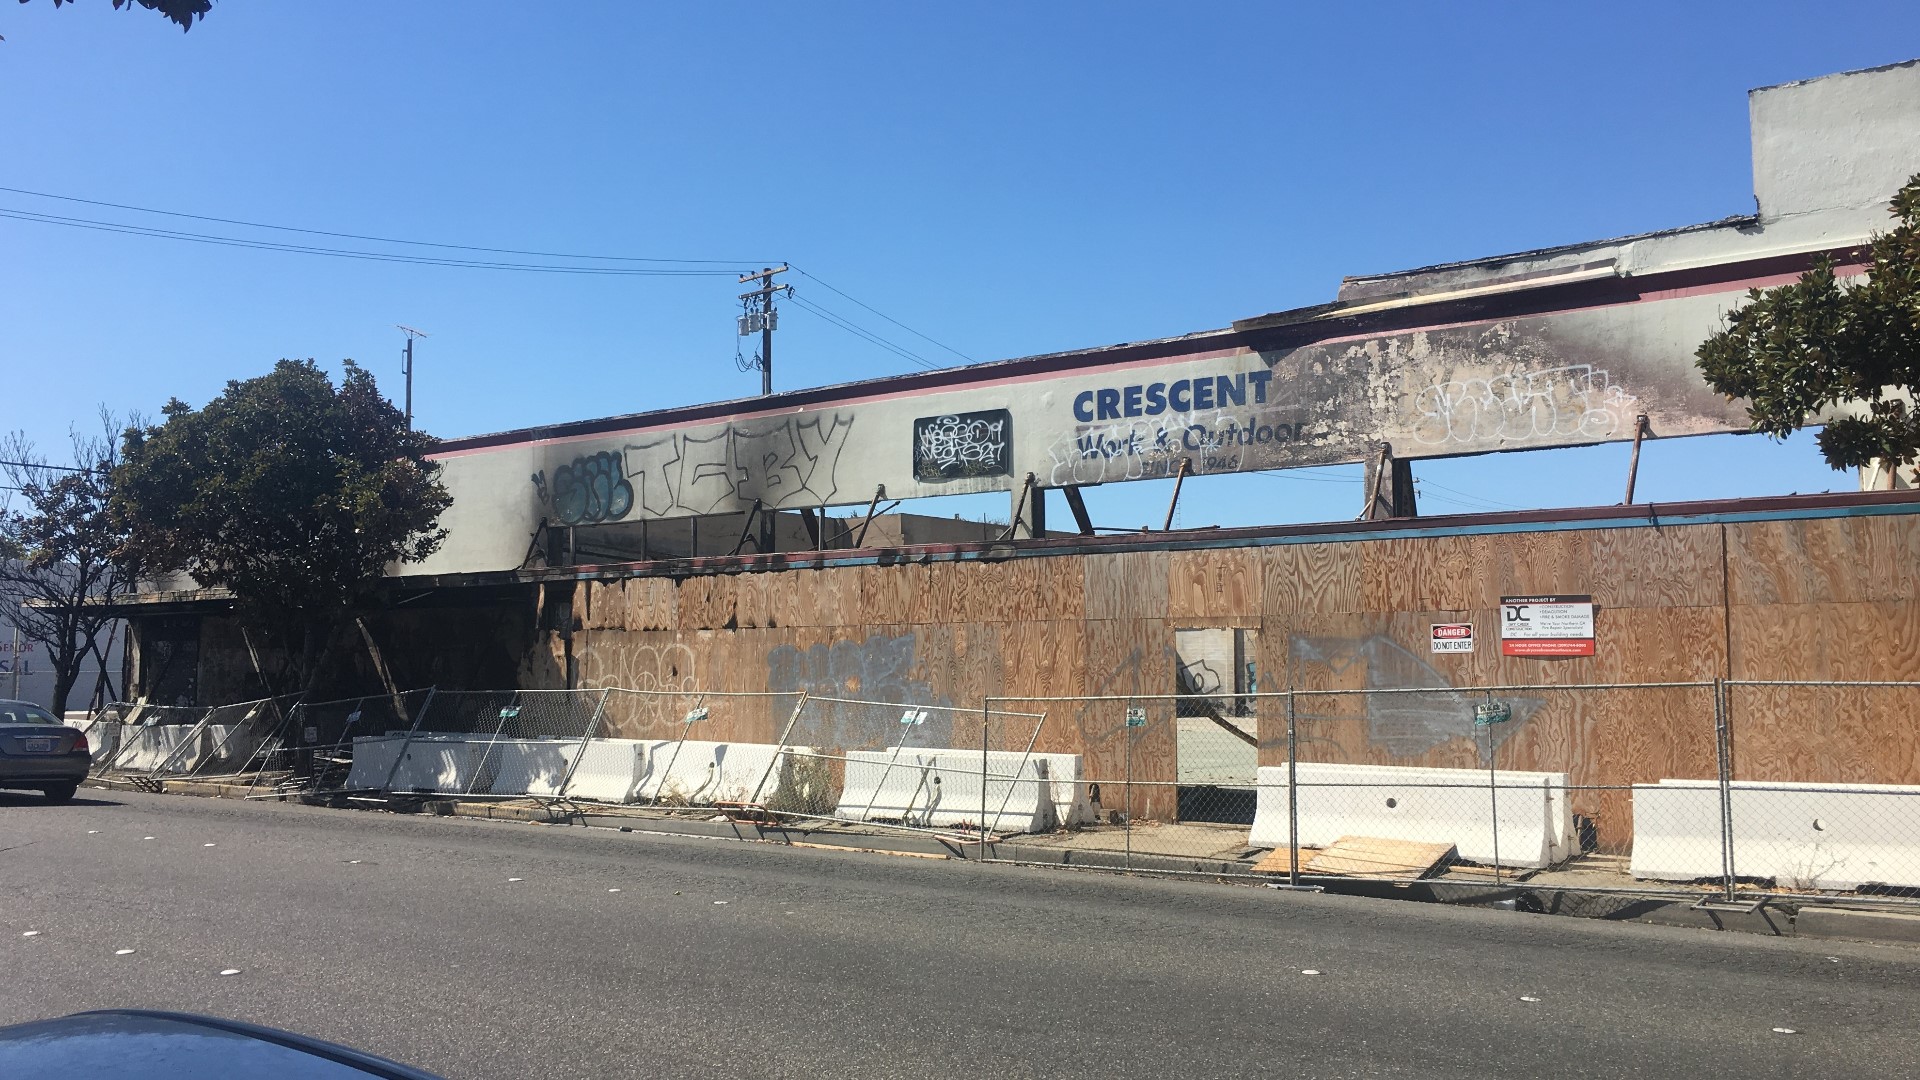 The City of Modesto says the fire that happened Thursday night was started by someone who was homeless, a transient who was warming fire in a barrel.